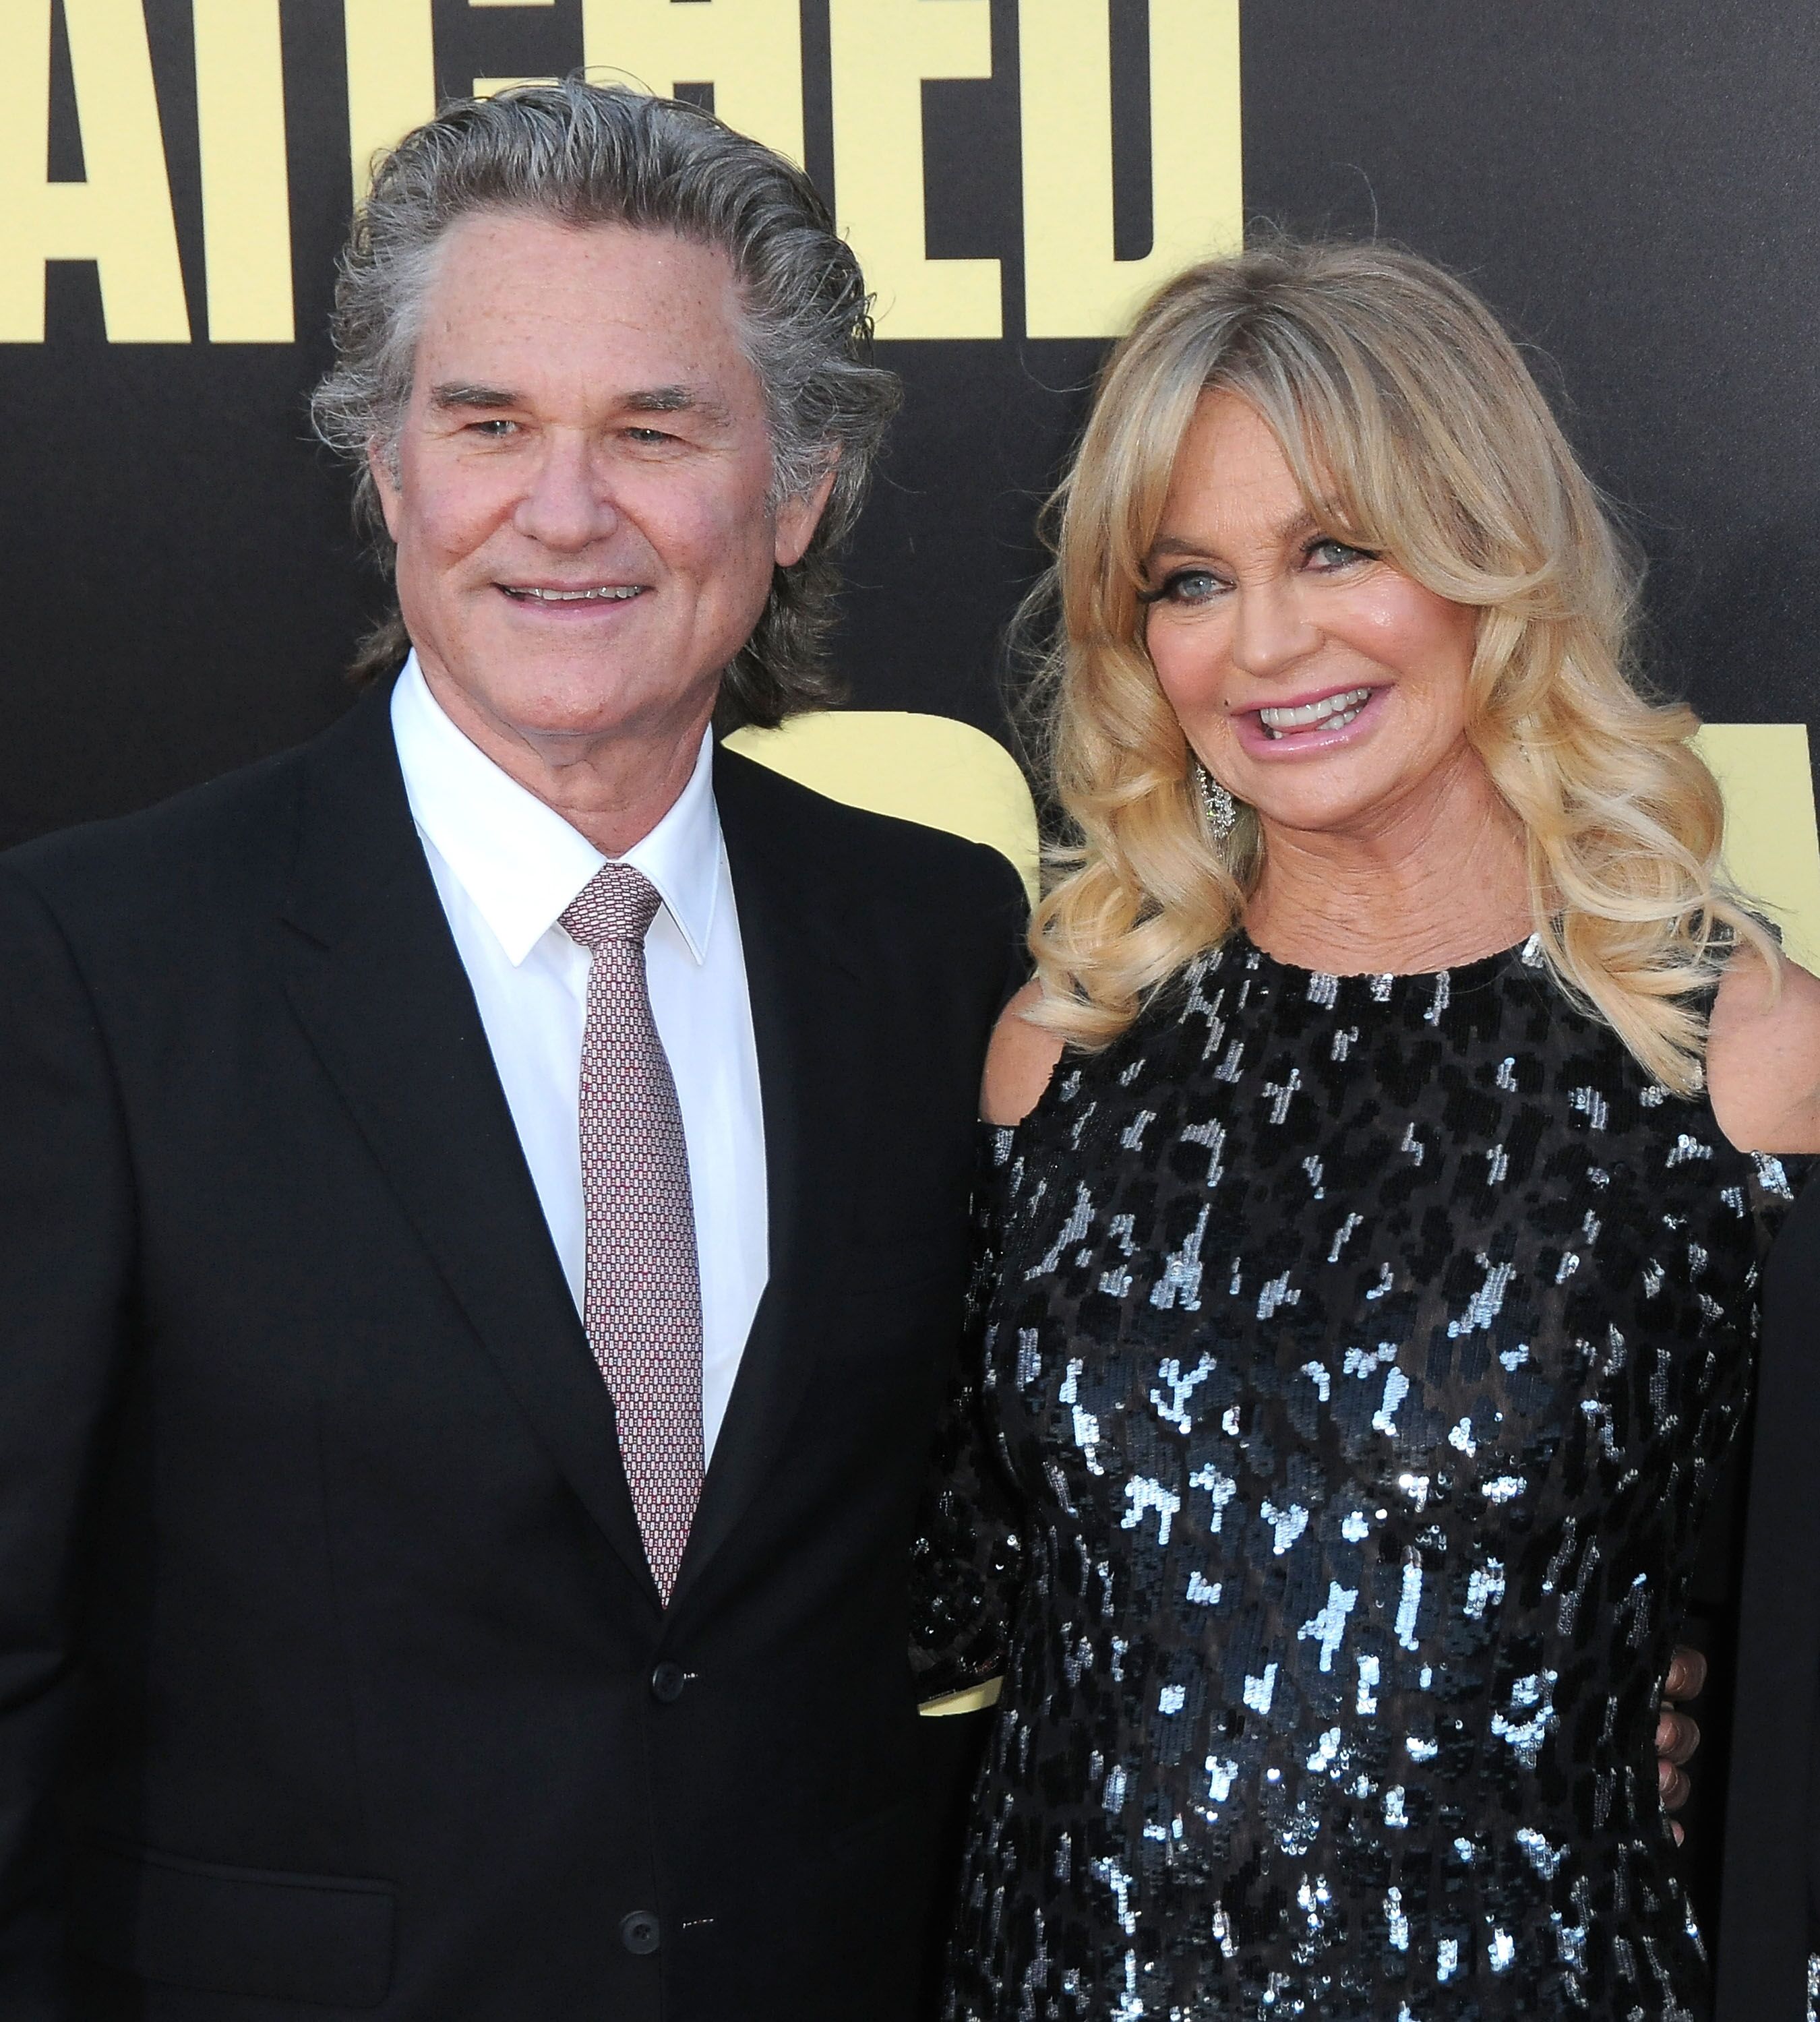 Kurt Russell and actress Goldie Hawn attend premiere of 20th Century Fox's' "Snatched" | Getty Images